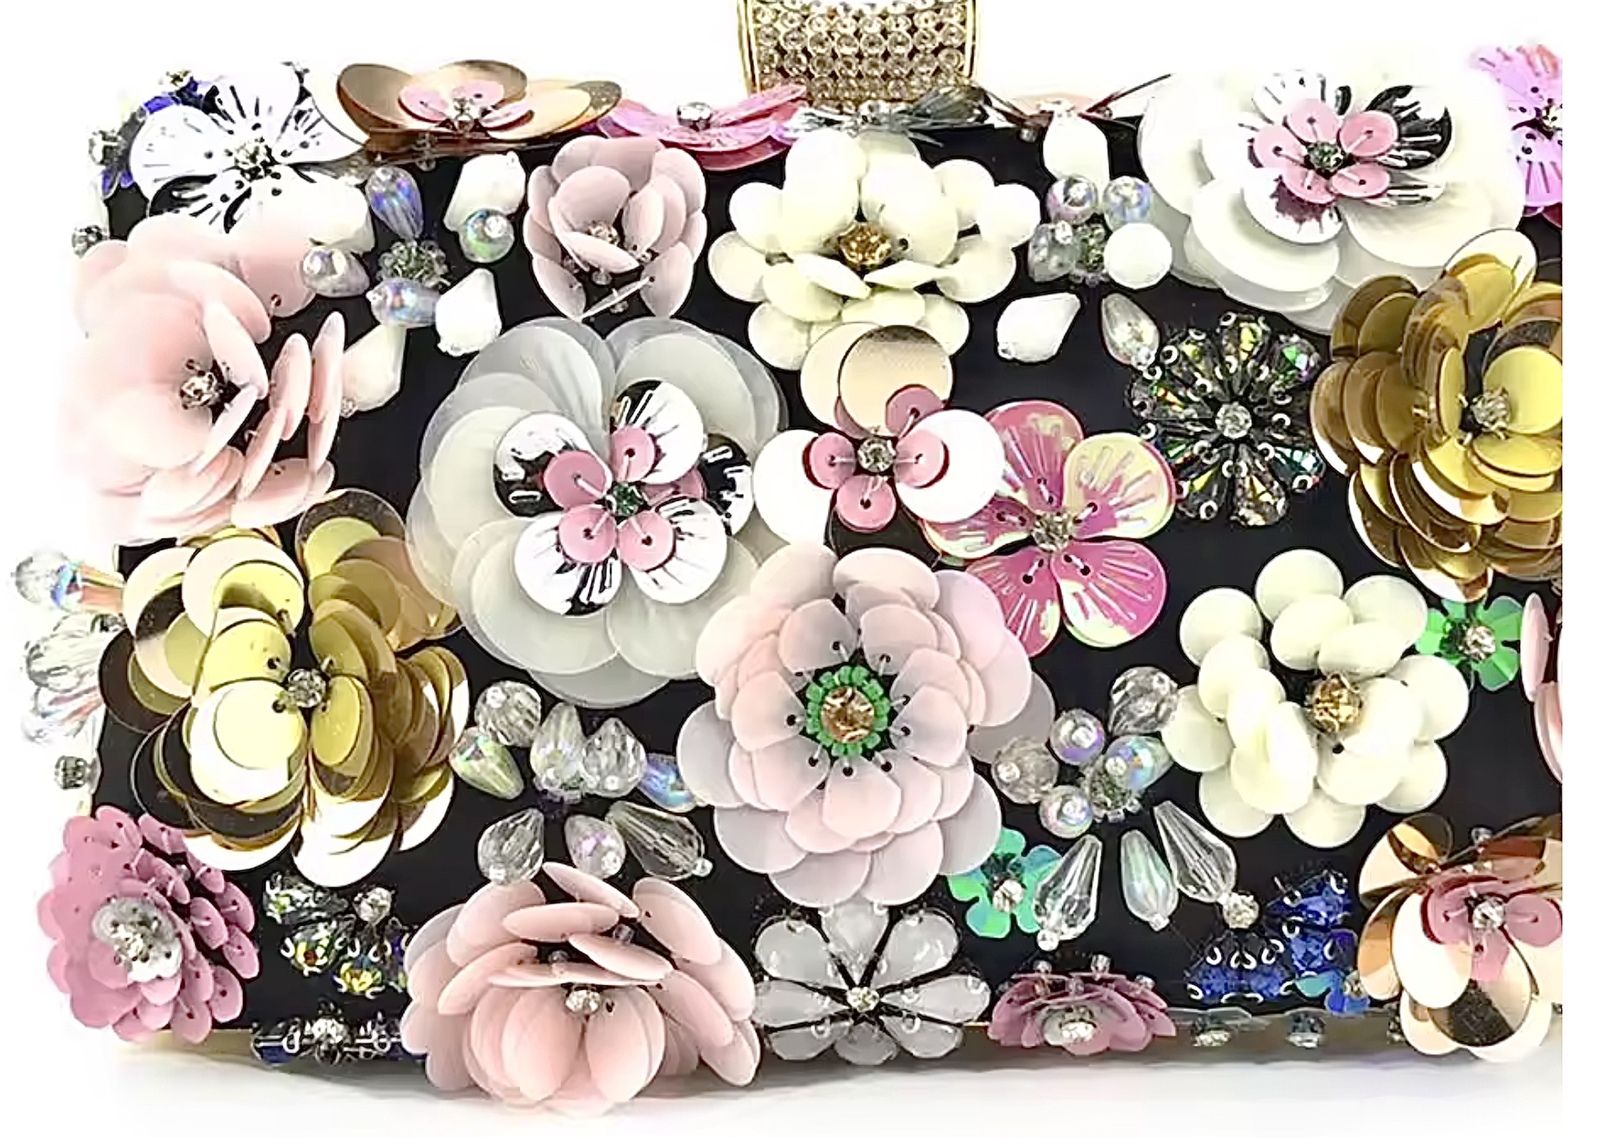 Primary image for TRULY A BEAUTIFUL ELEGANT  Clutch Sequins Crystal beads Flowers hand bag❤️